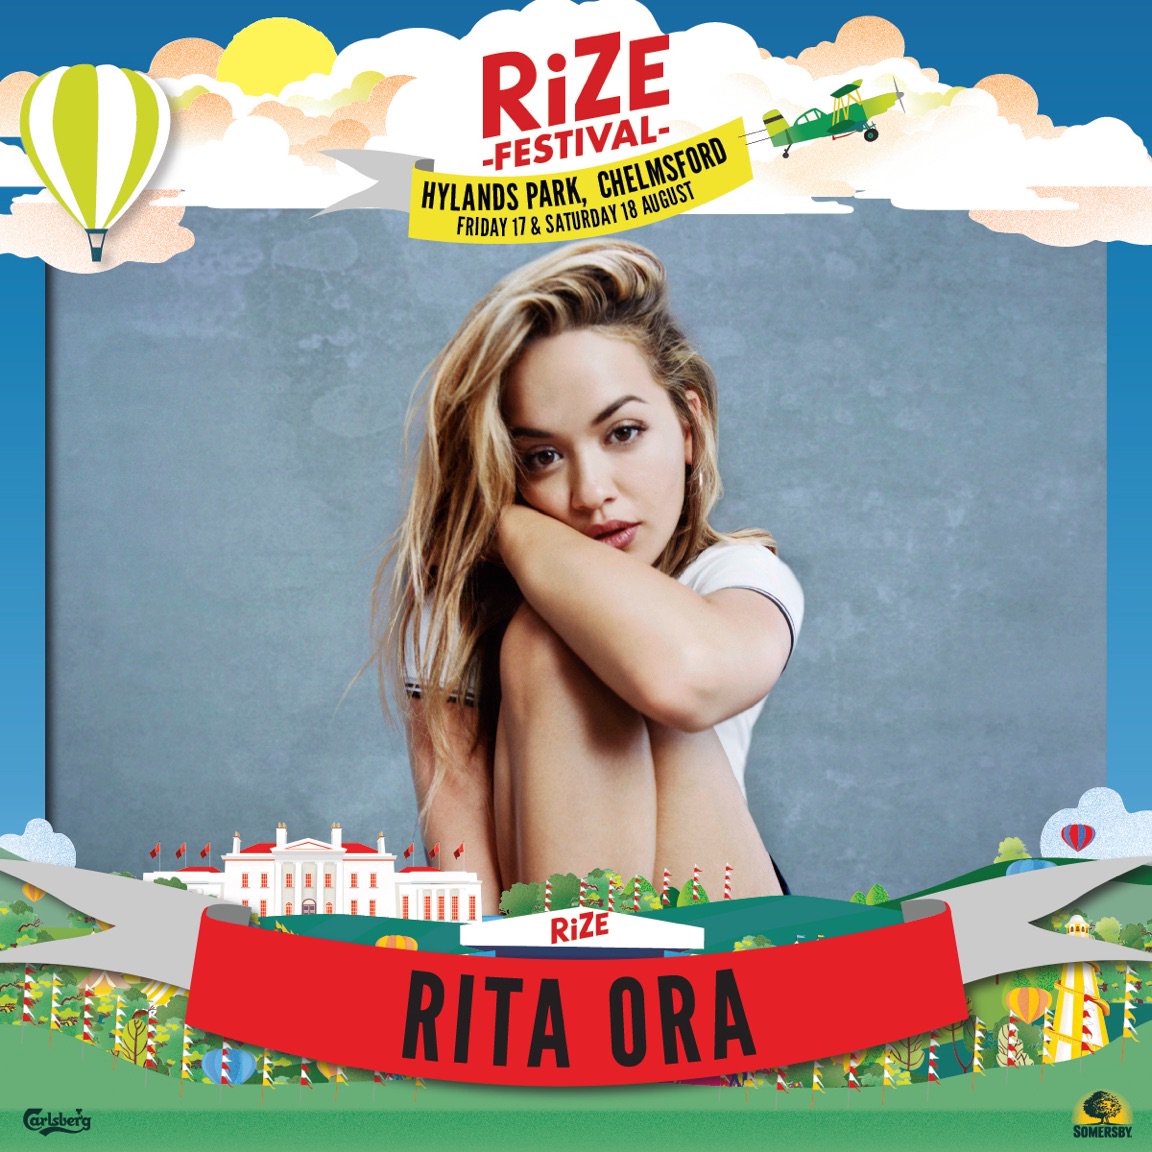 Come see me at the @RiZEFestival!! ❤️❤️ Tickets go on sale 9:30am Friday at https://t.co/ZFBXTIPbCf https://t.co/UcA7vdk6tR